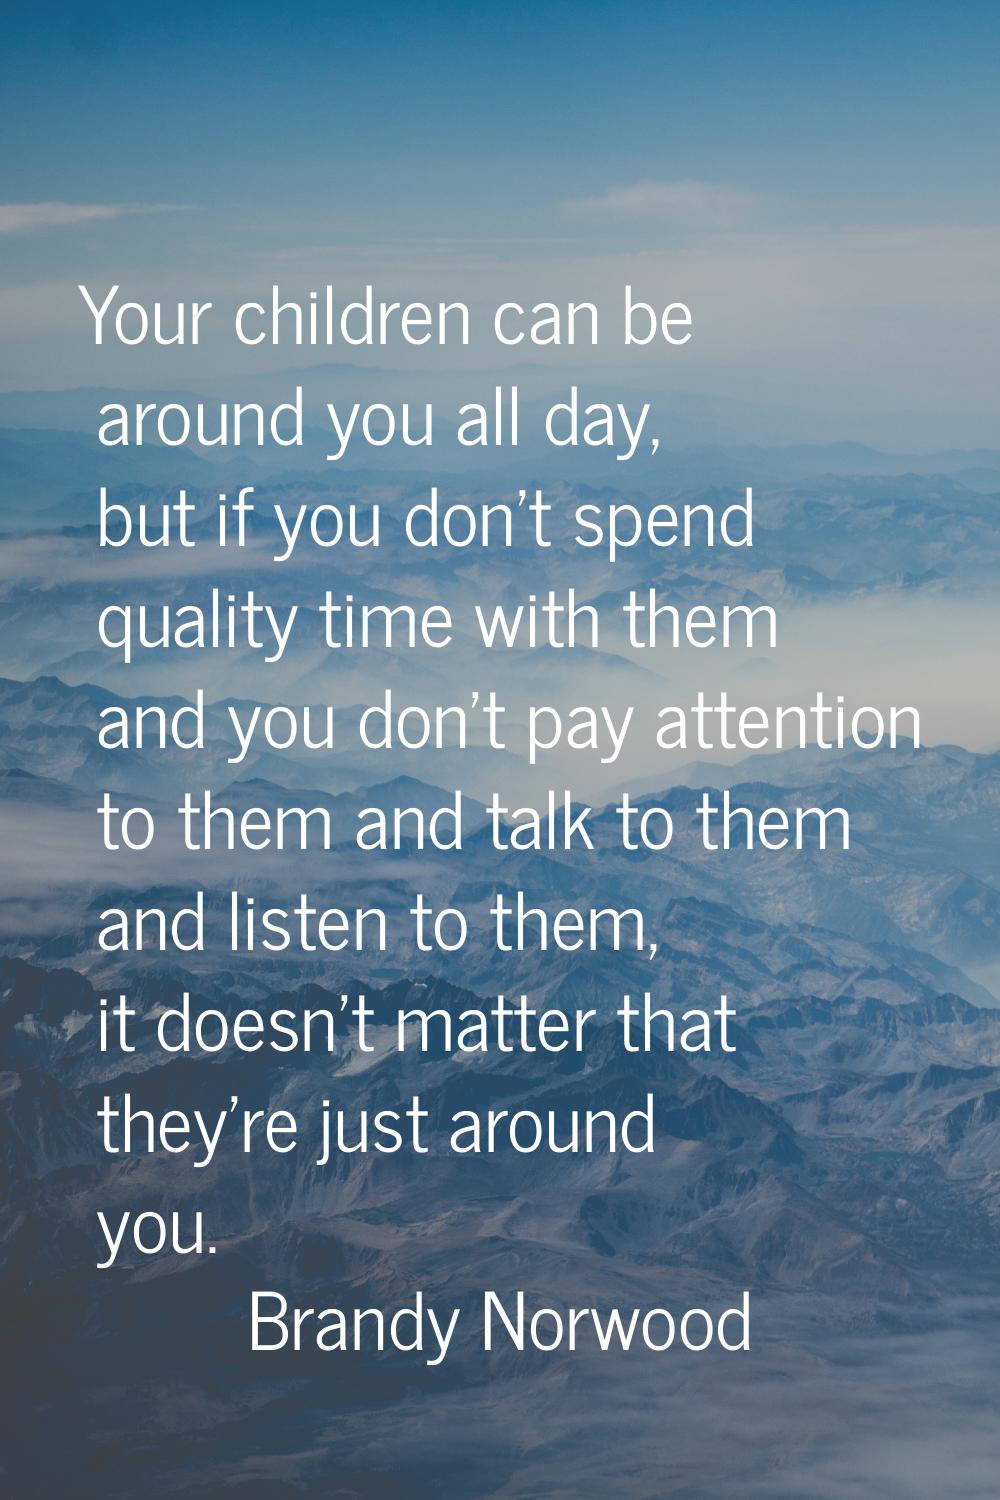 Your children can be around you all day, but if you don't spend quality time with them and you don'